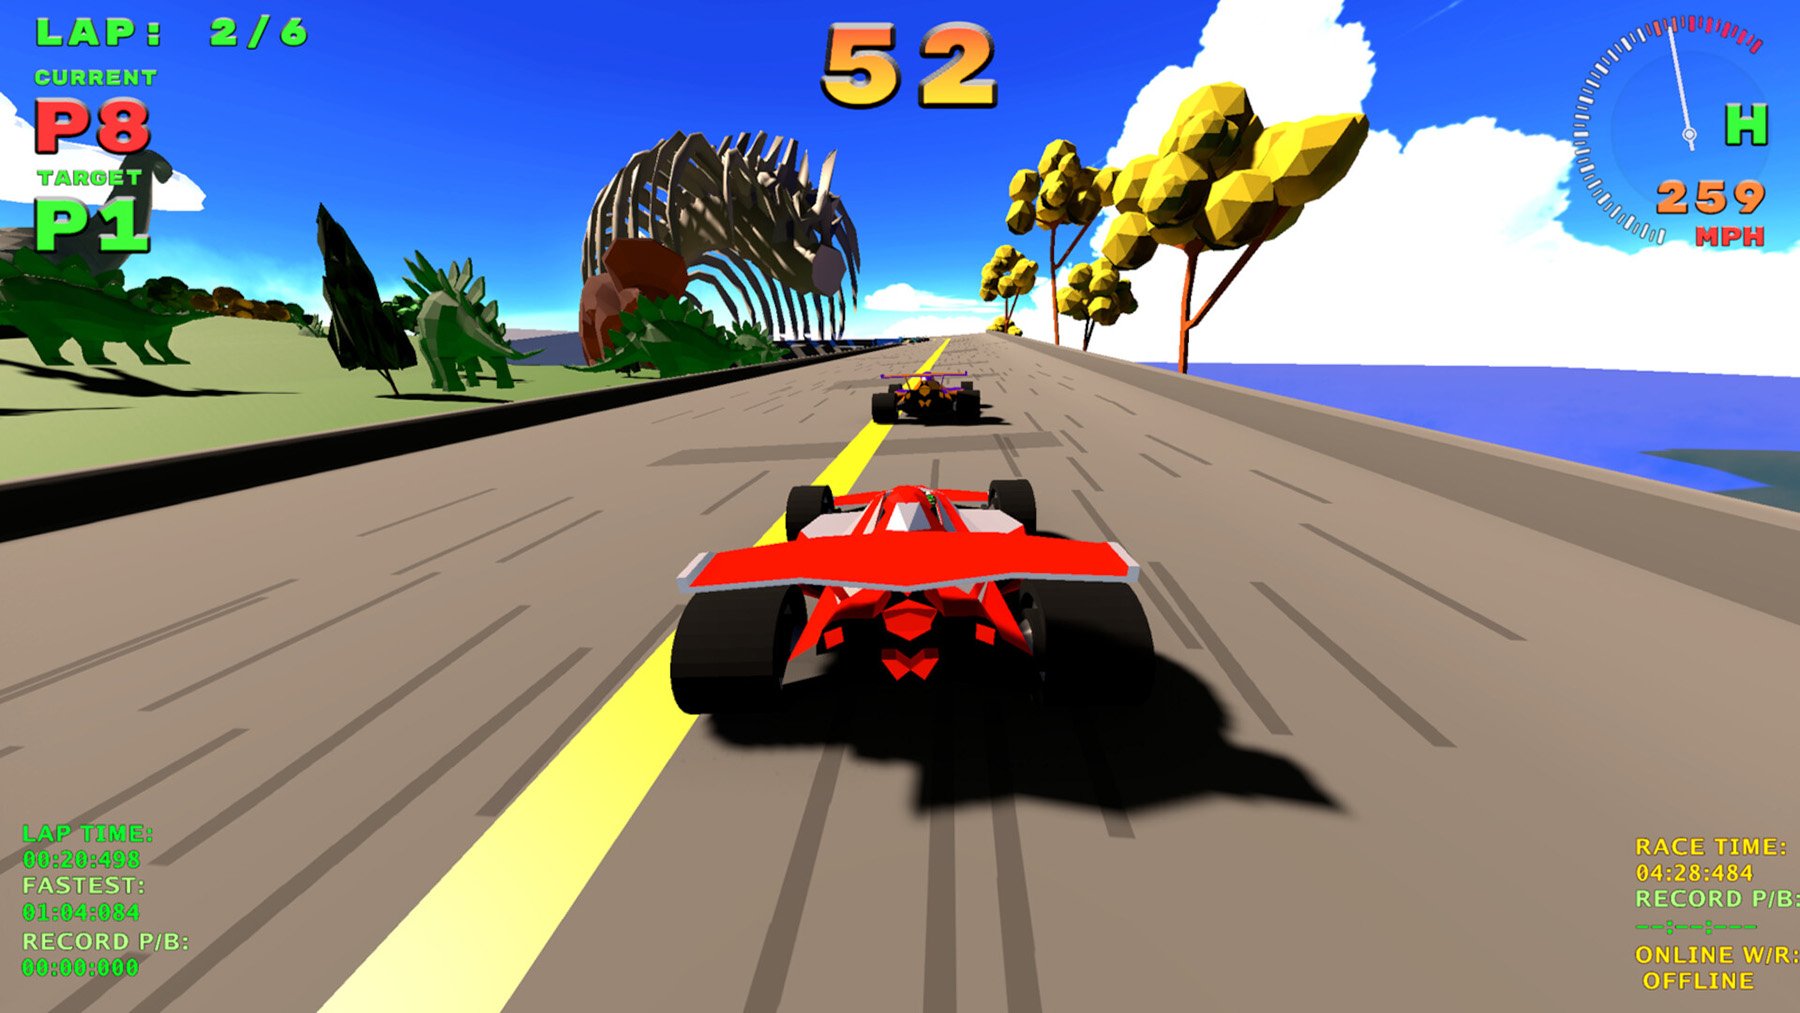 Retro racing game Super Polygon Grand Prix has us excited for its upcoming launch